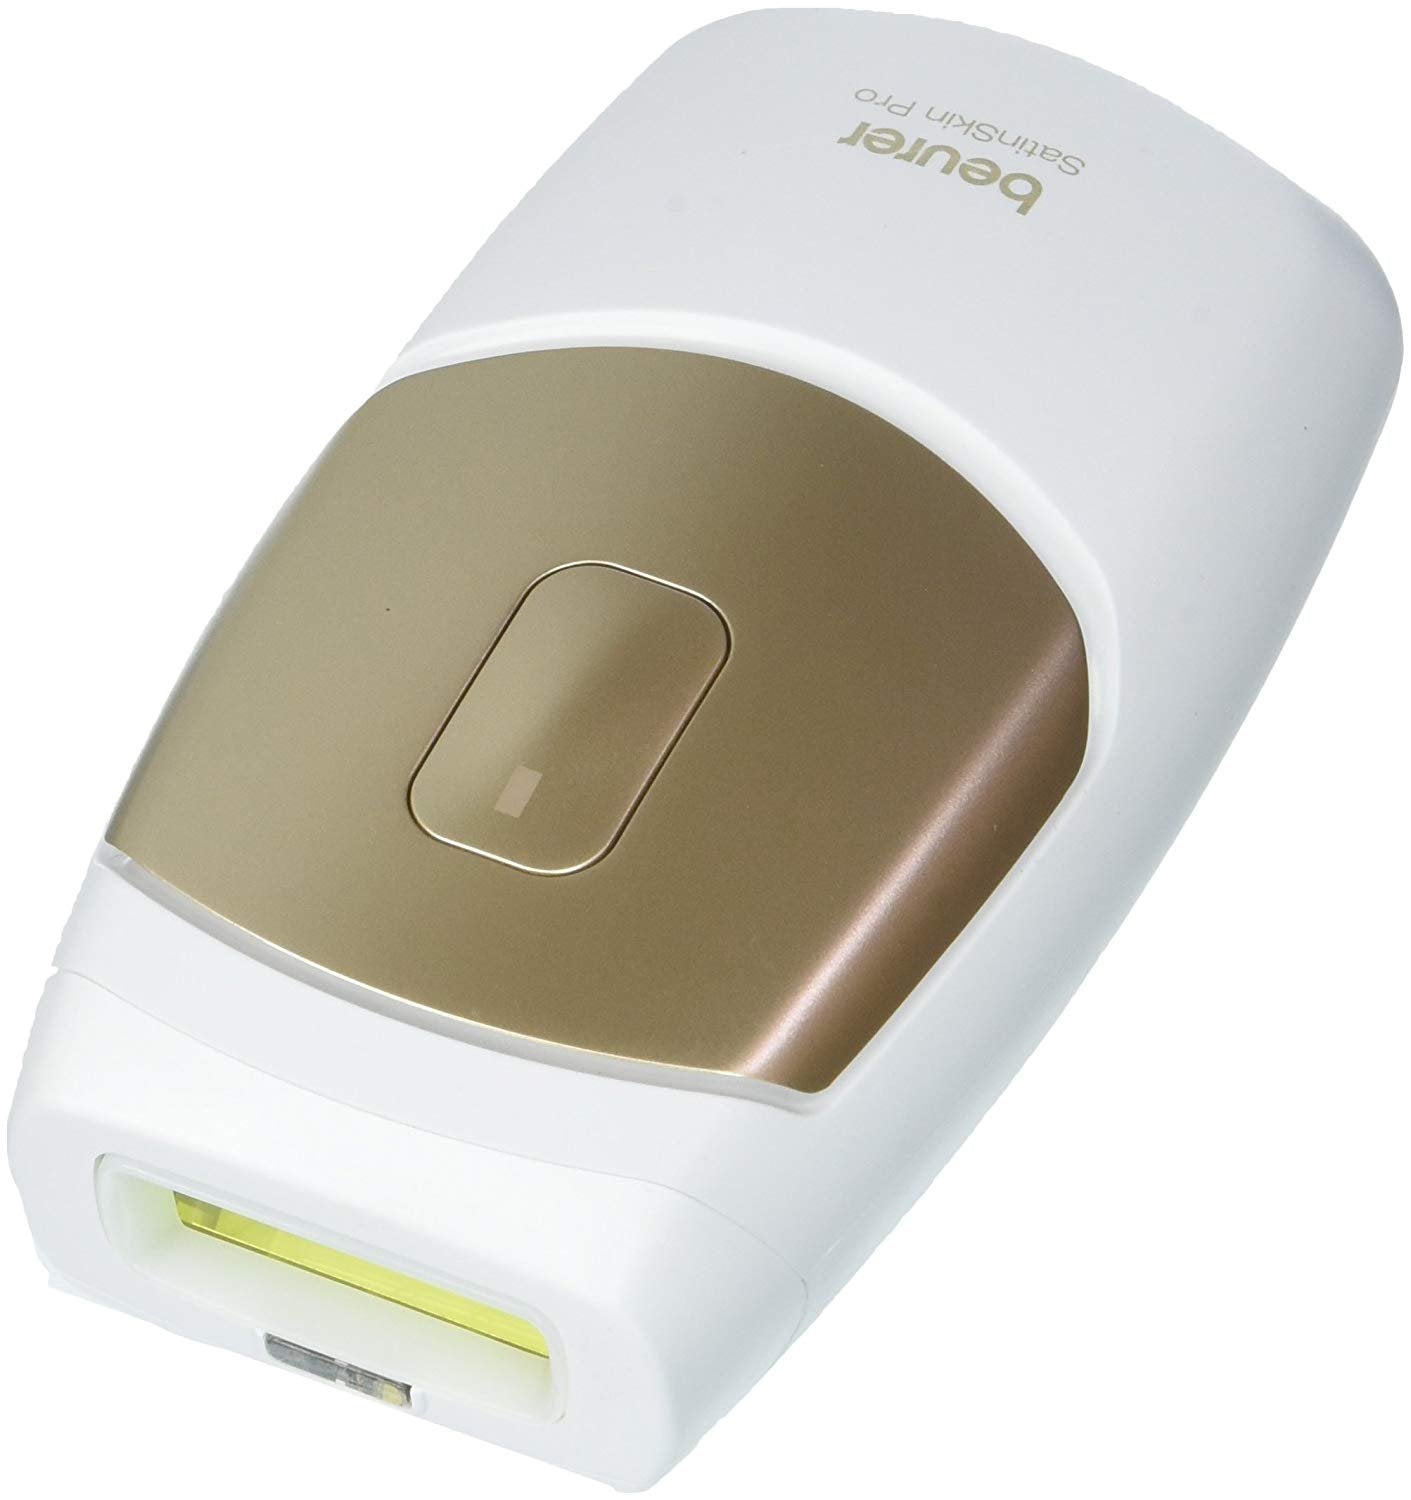 Hair Removal IPL7500 – North America Device, Beurer